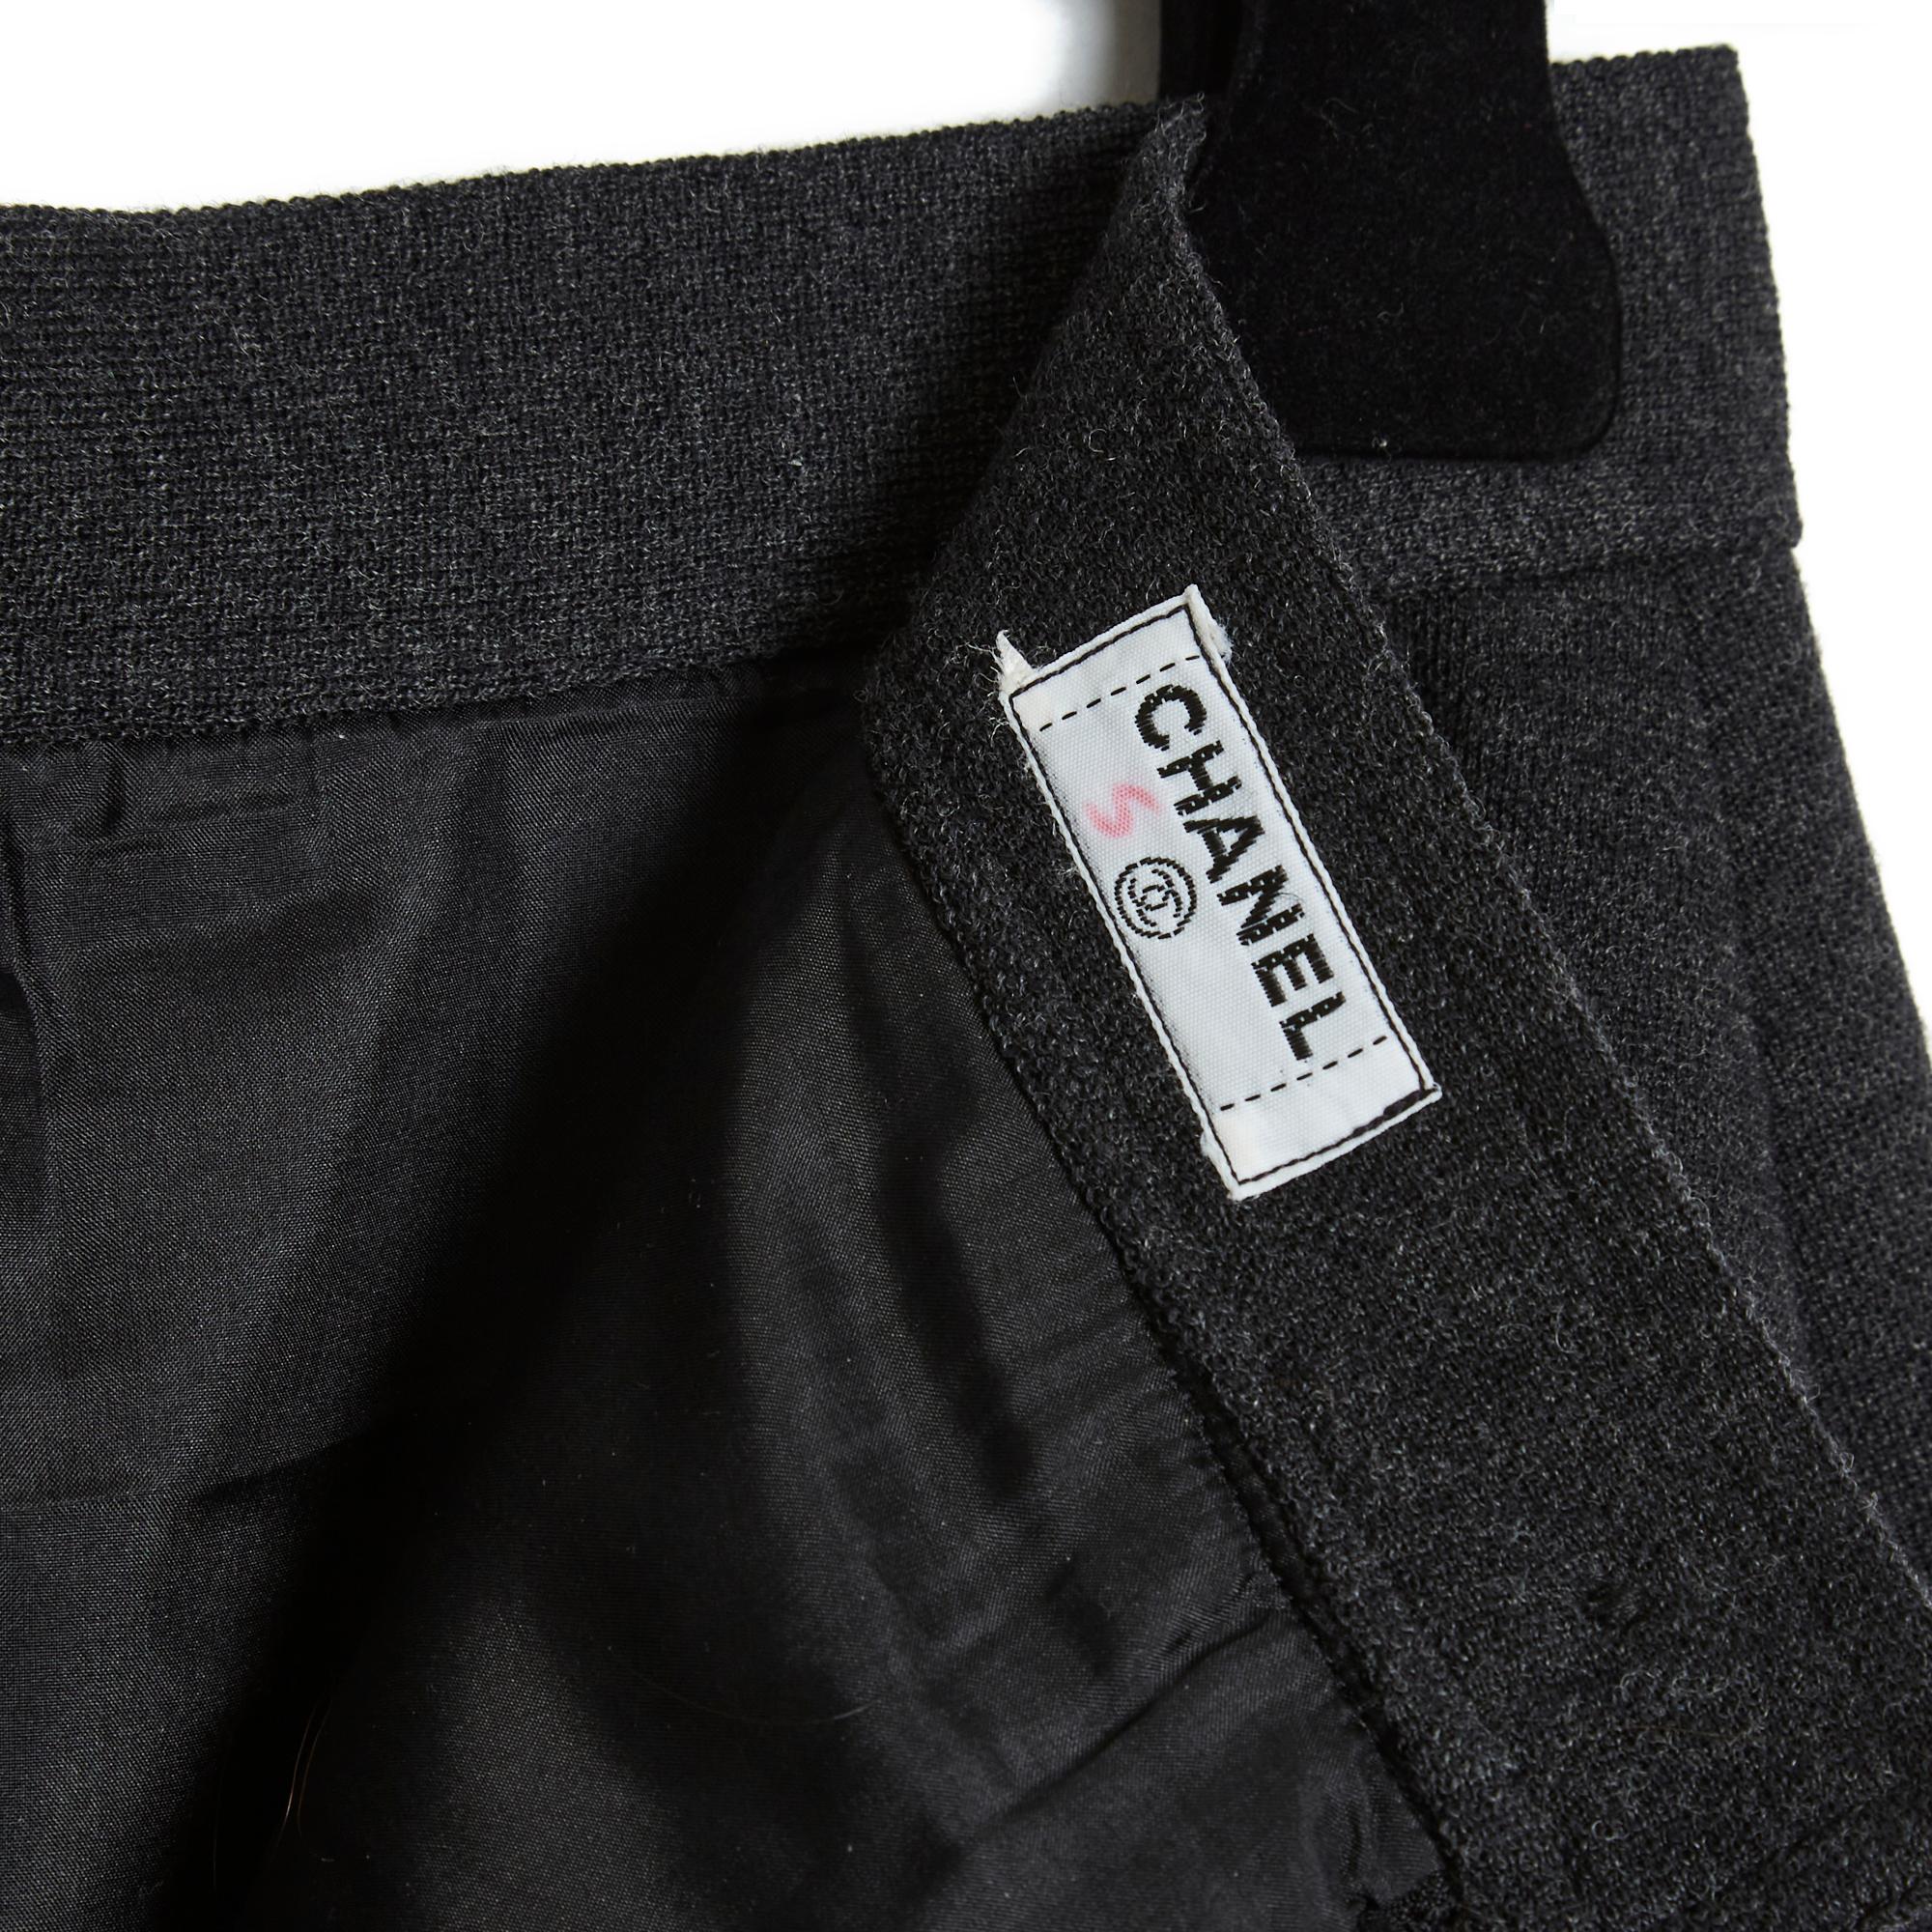 Chanel circa 1995 straight skirt in thick anthracite gray wool jersey, closed with a zip and a button at the back, lined with matching silk. No more size label but the measurements indicate a 36FR: size 35 cm, length 63.5 cm. The skirt is in very